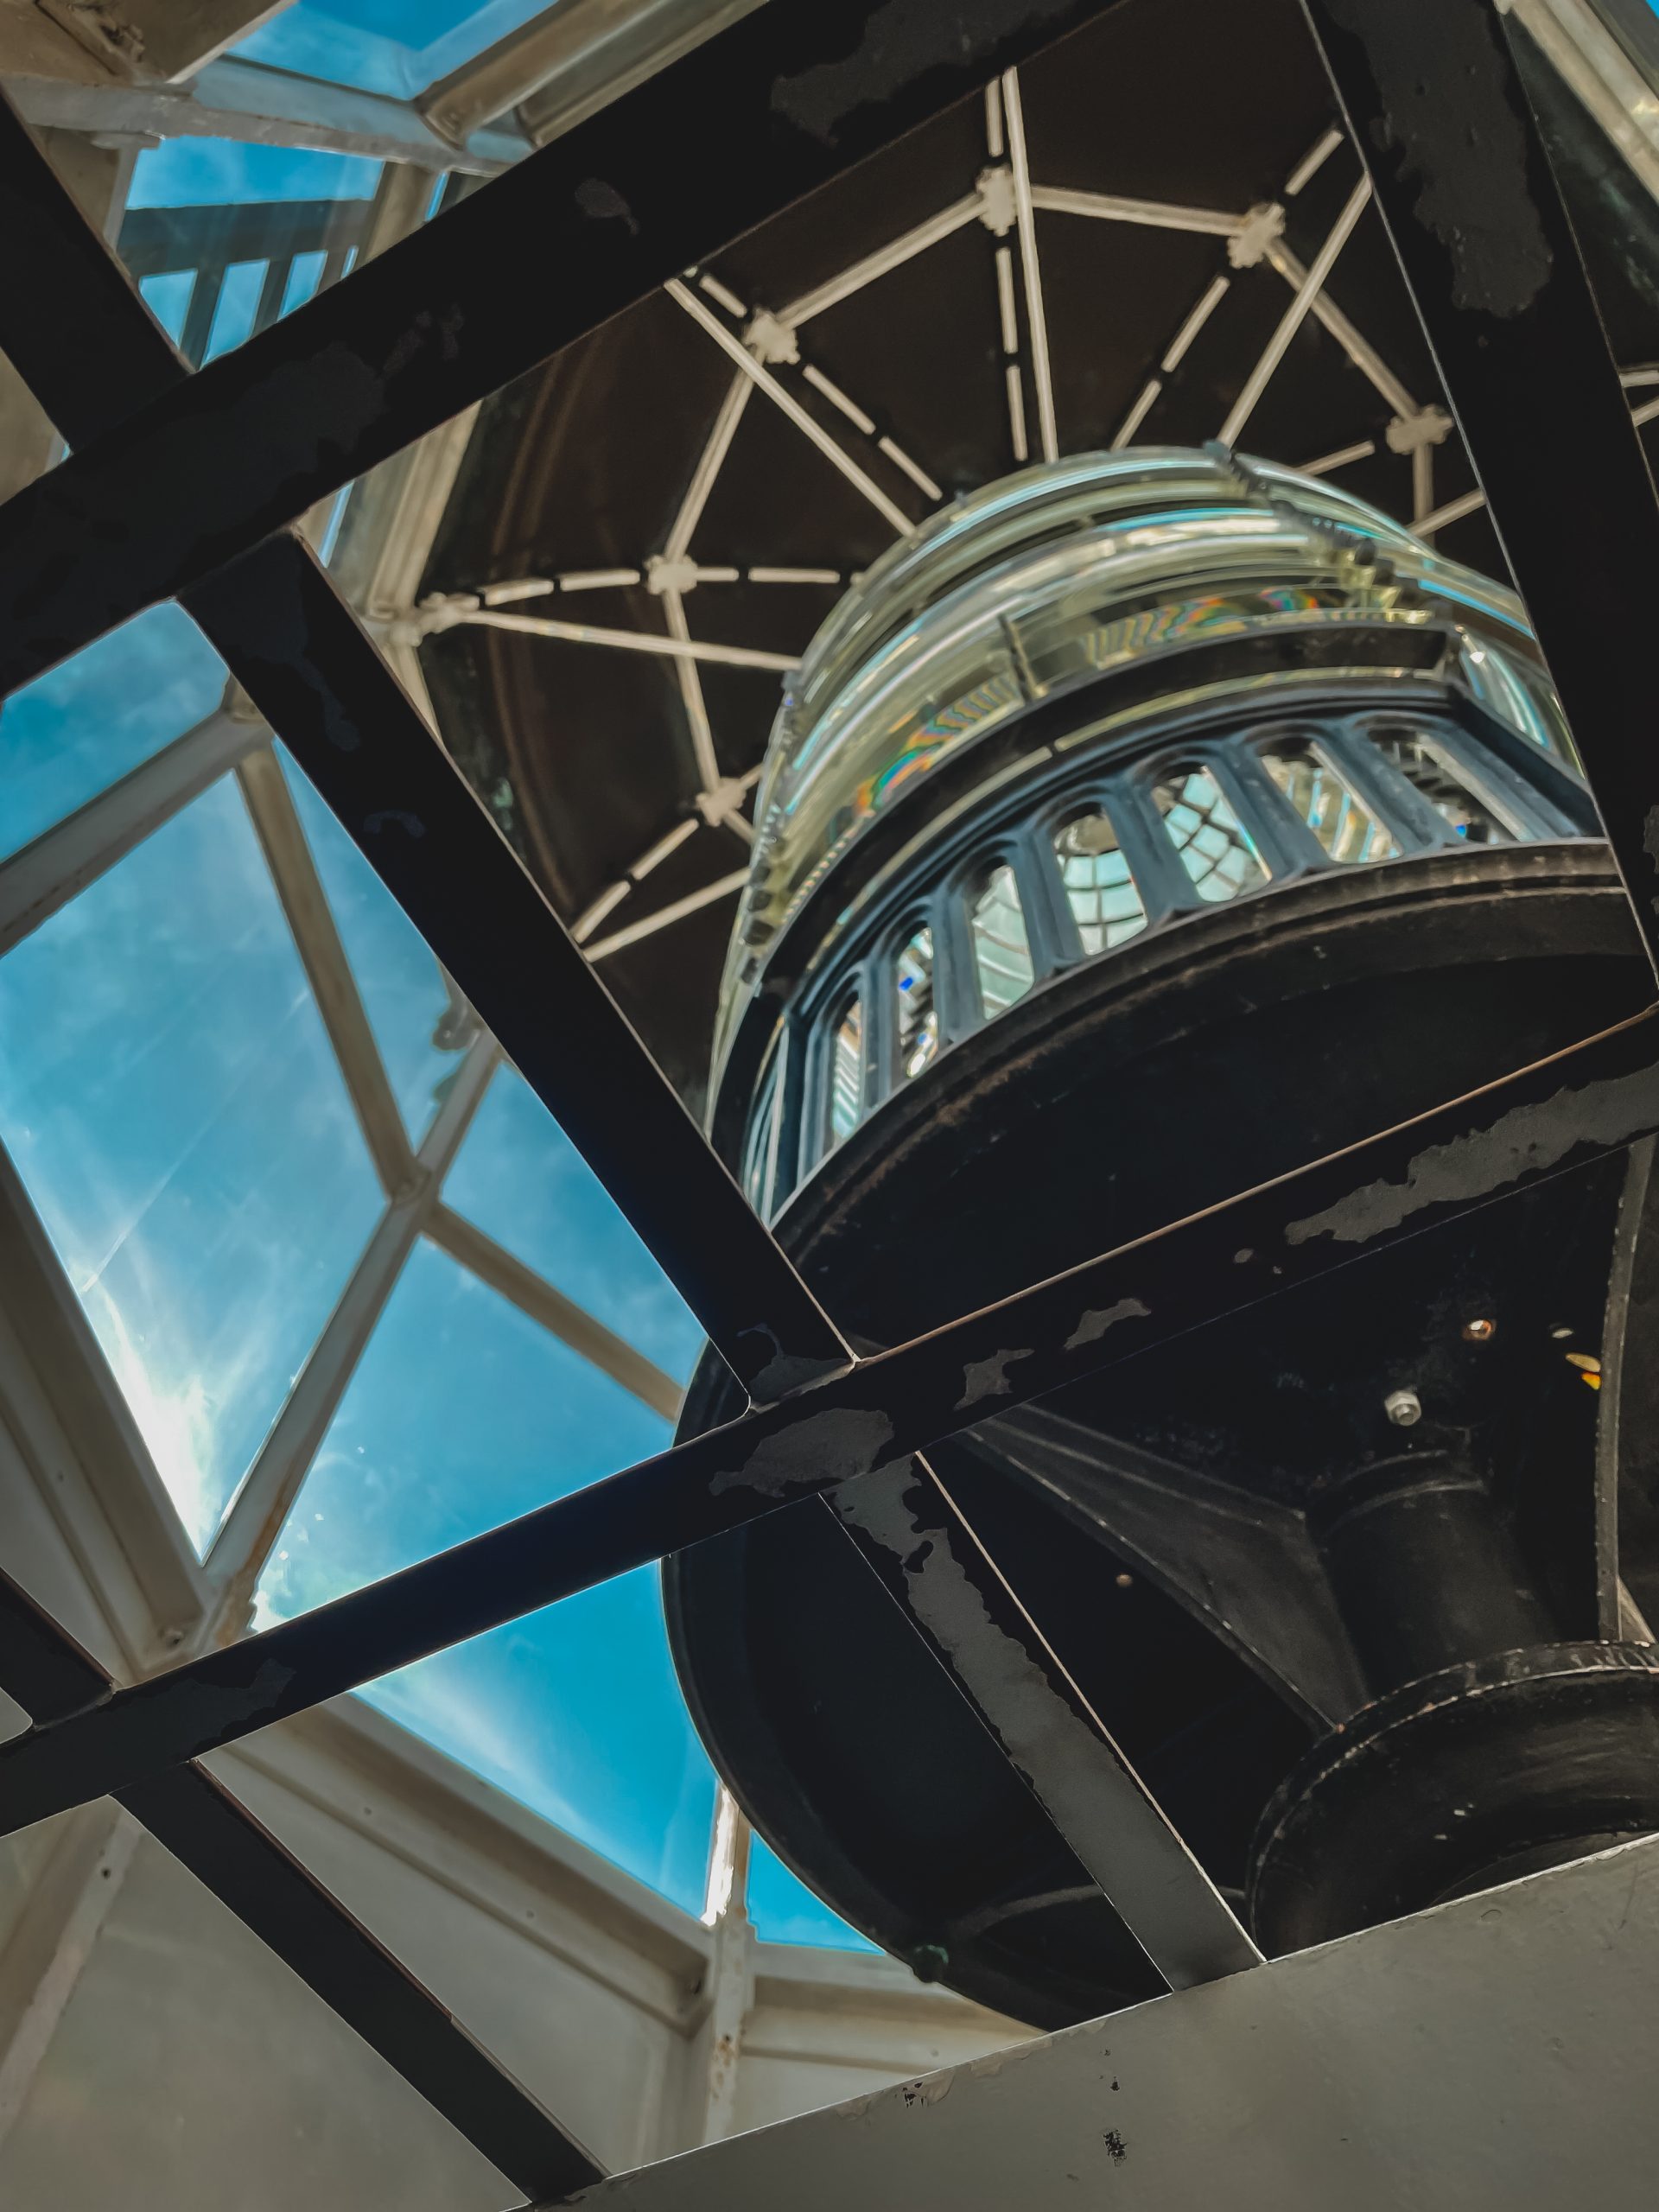 Looking up at the Lantern in the Lighthouse